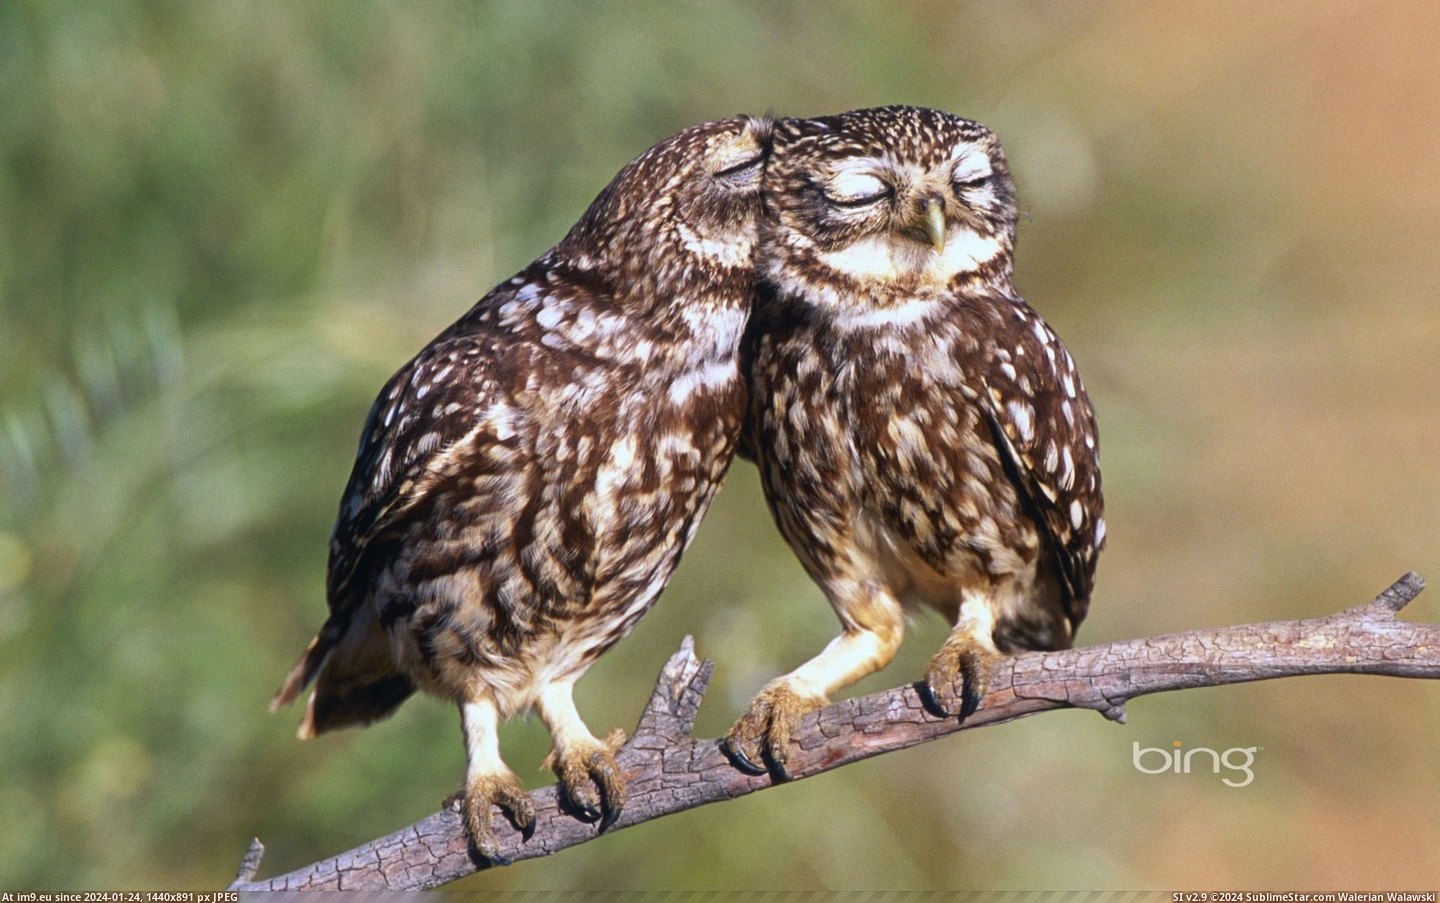 Little owls (Athene noctua) roost in Extremadura, Spain (© age fotostock) (in Best photos of February 2013)